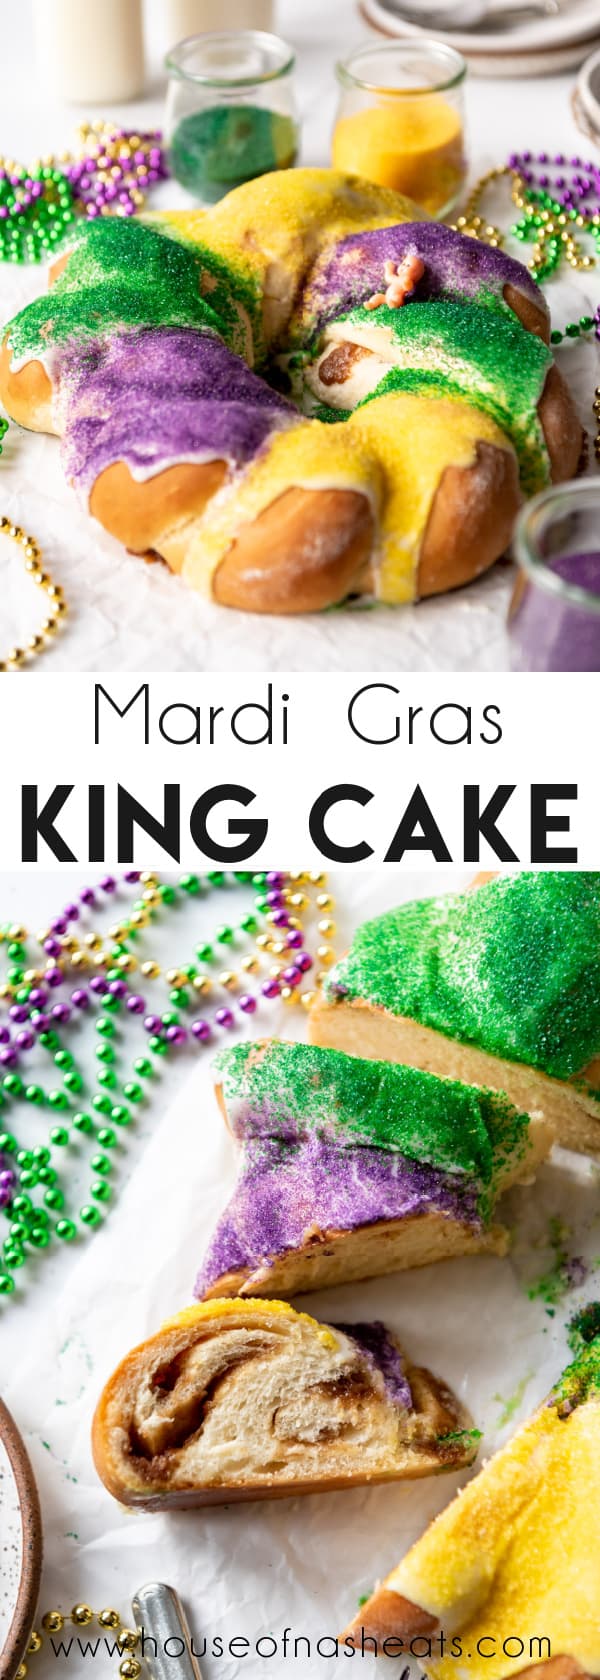 A collage of images of traditional King Cake with text overlay.